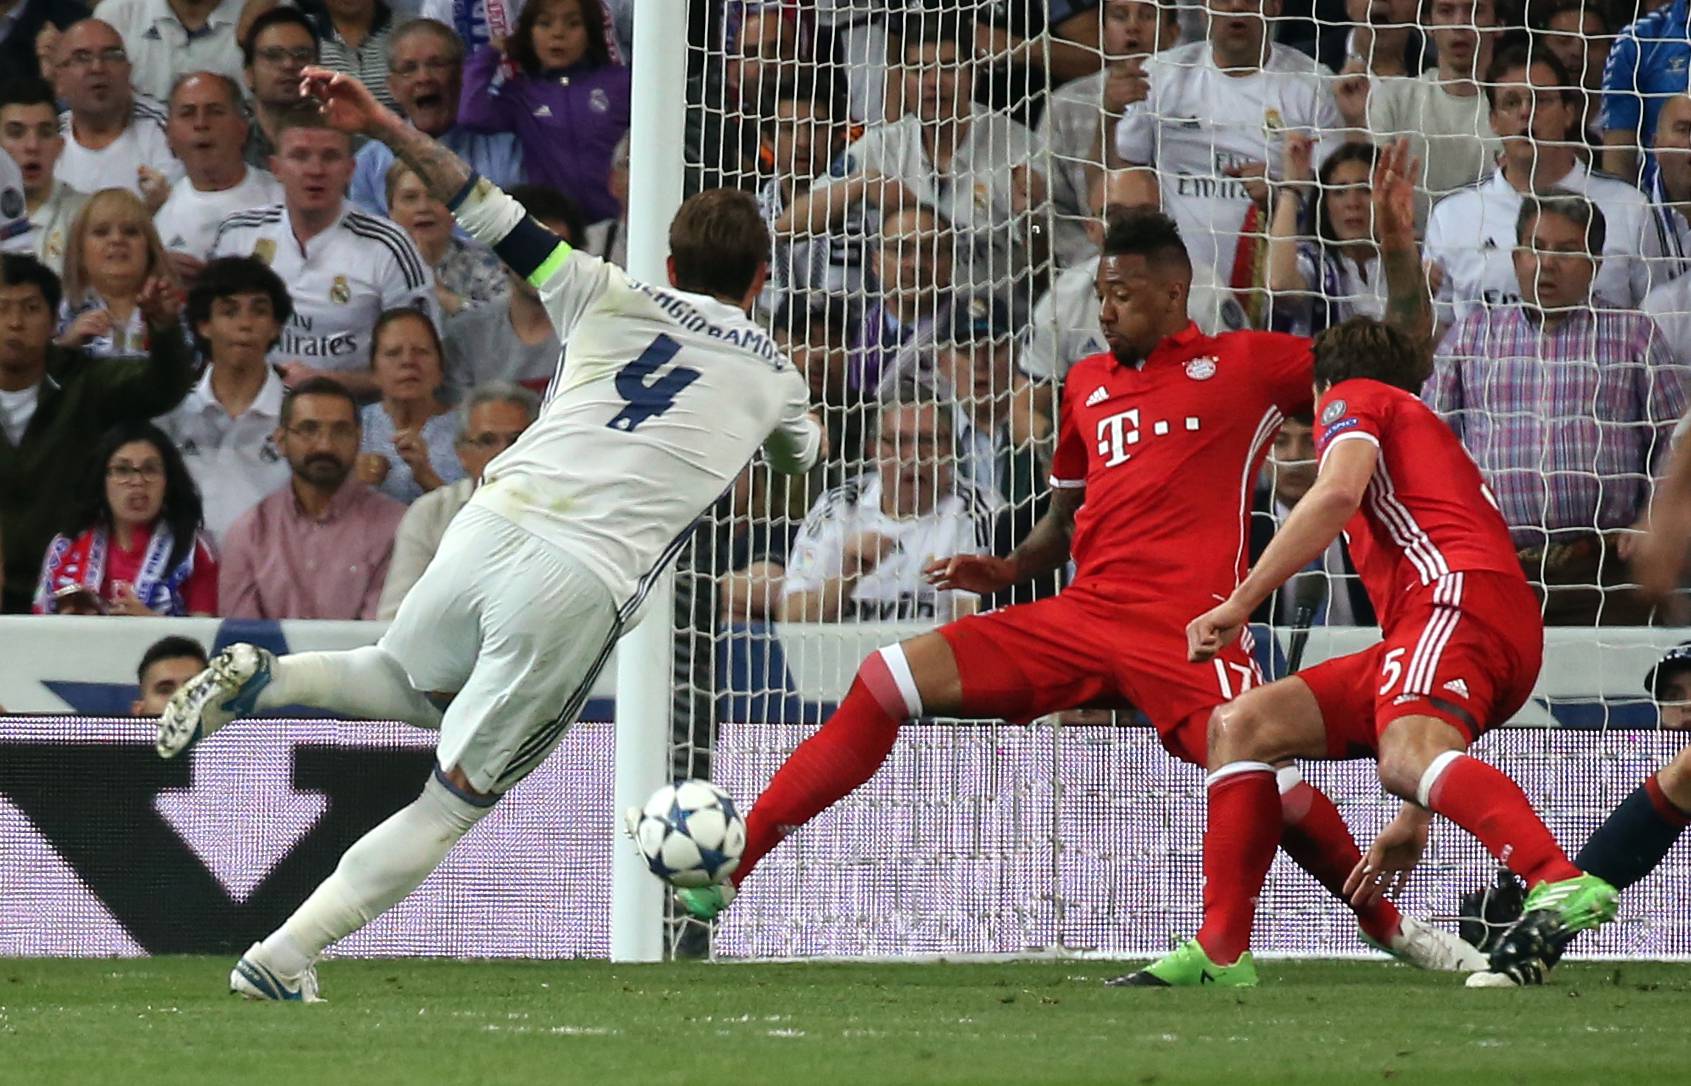 Real Madrid's Sergio Ramos has his shot cleared off the line by Bayern Munich's Jerome Boateng